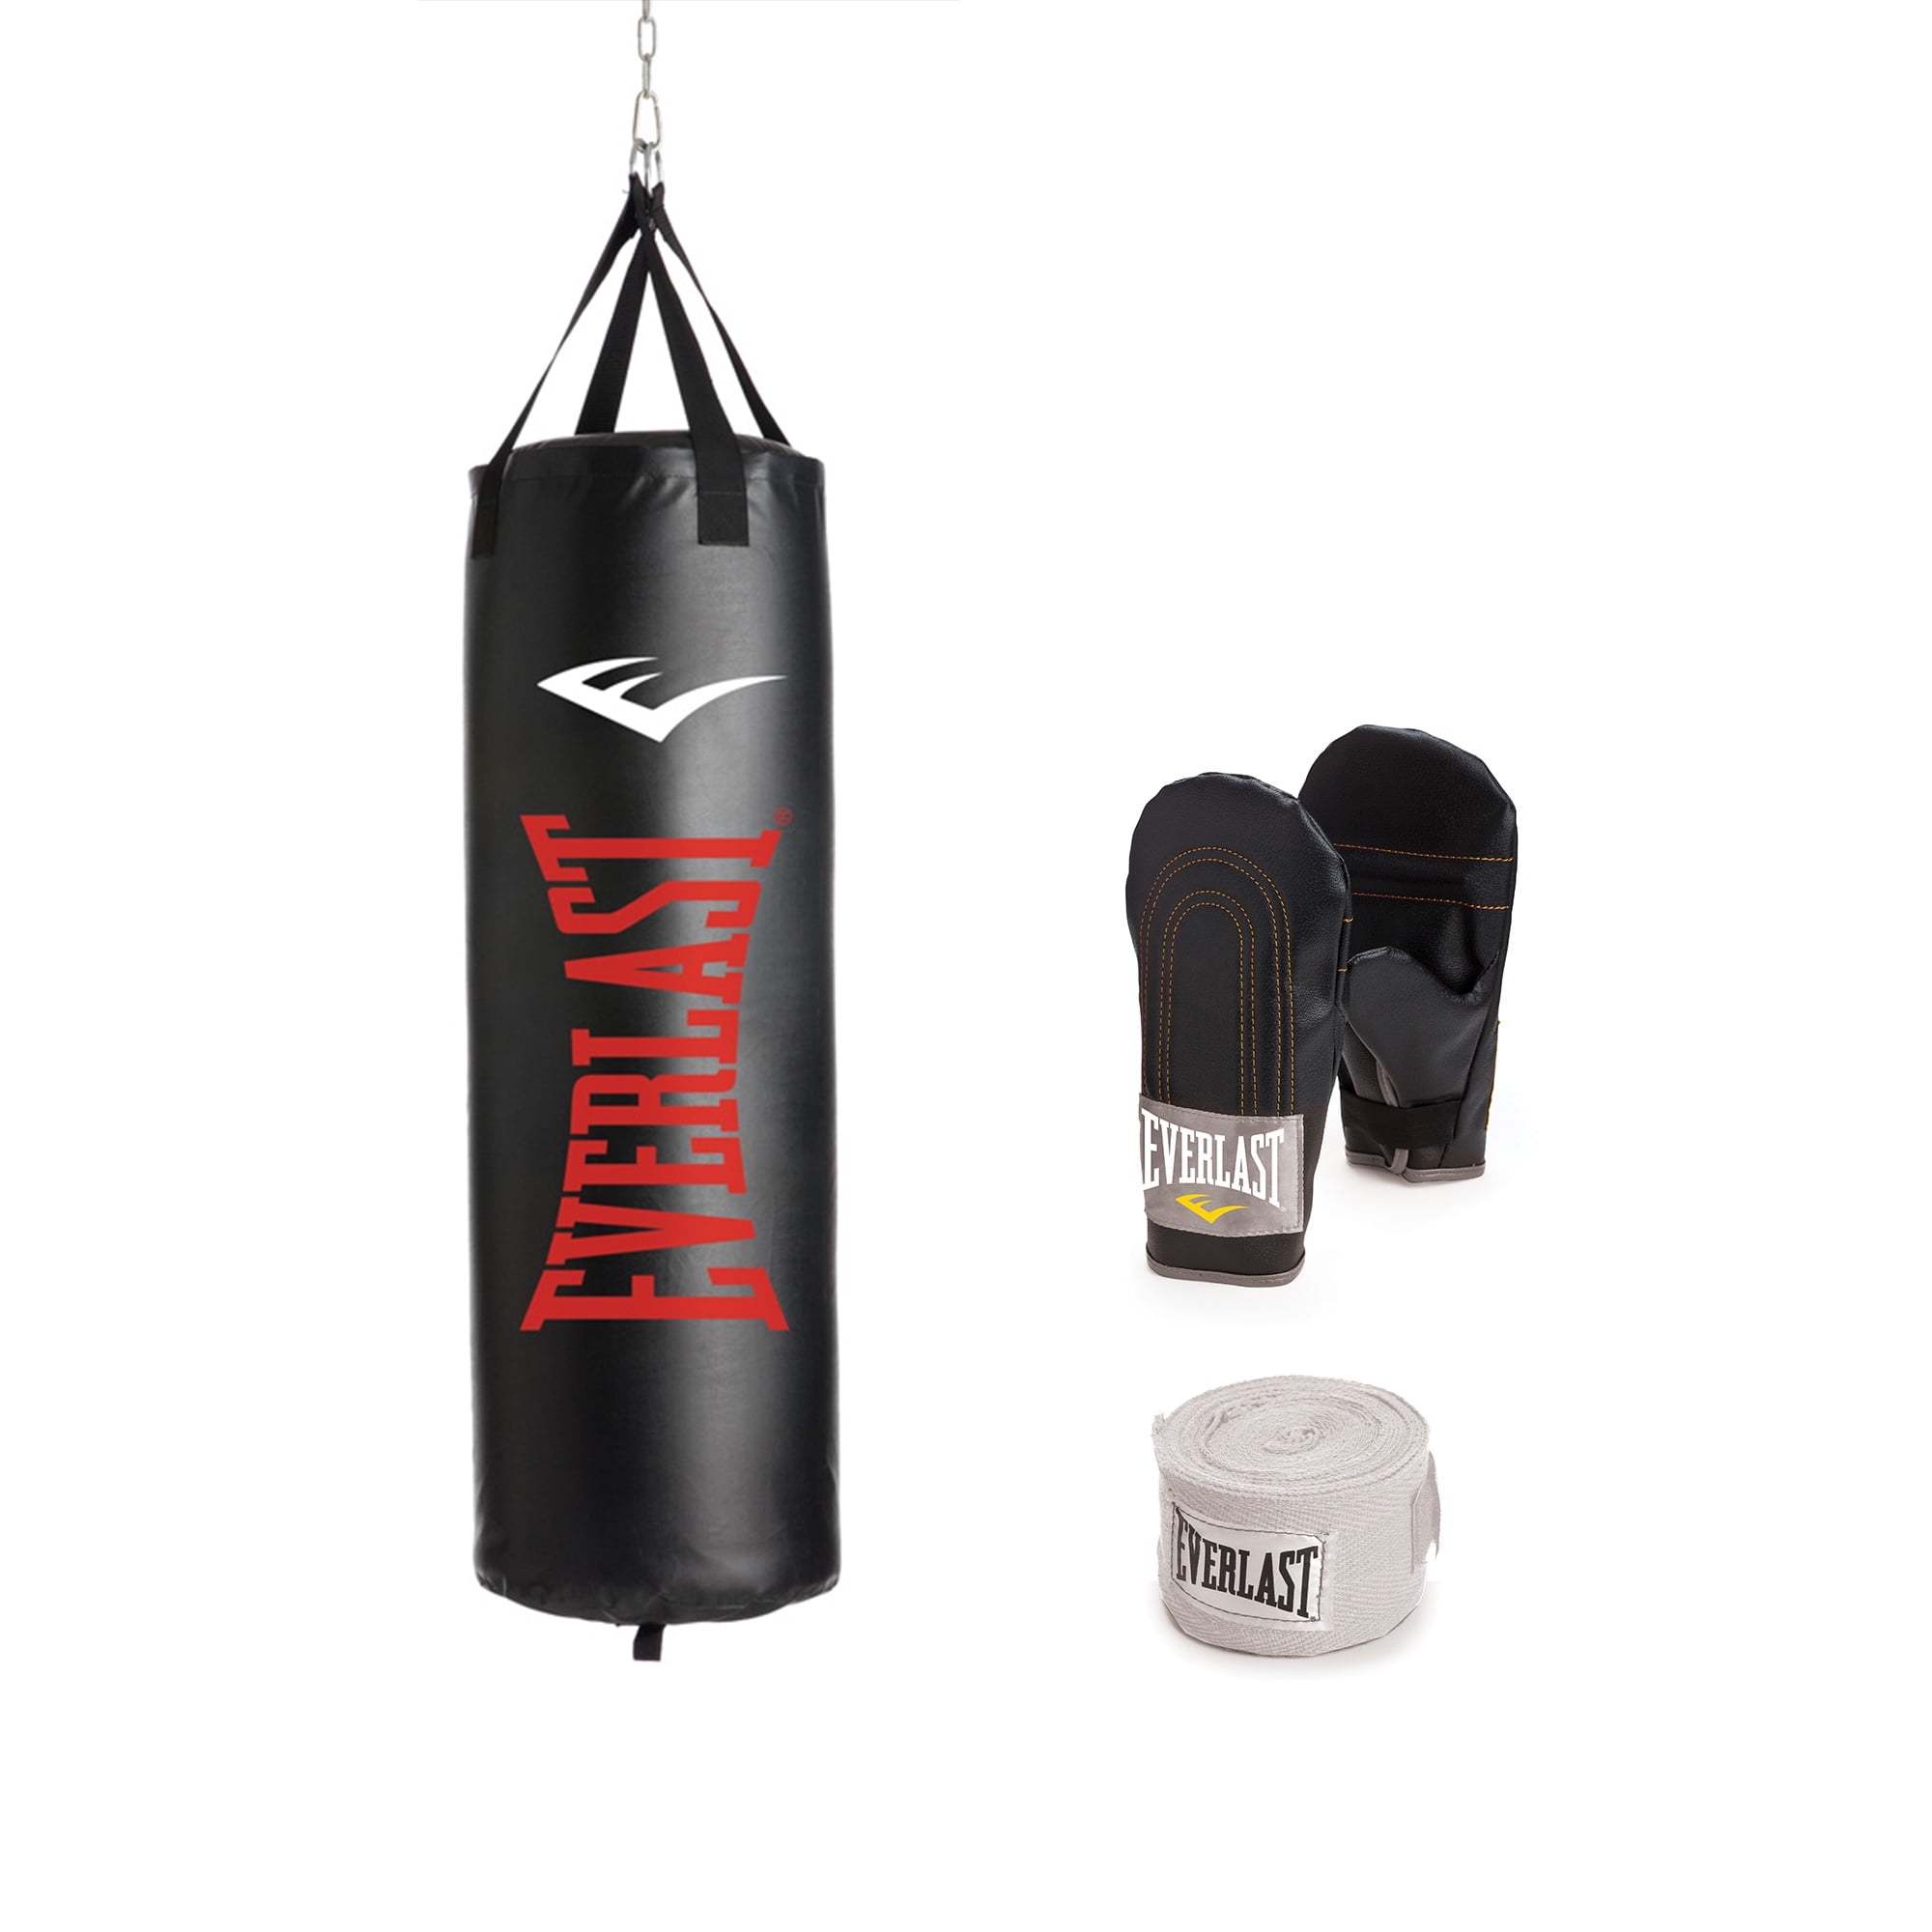 Everlast PowerCore Standing Indoor Rounded Fitness Training Bag for sale online 